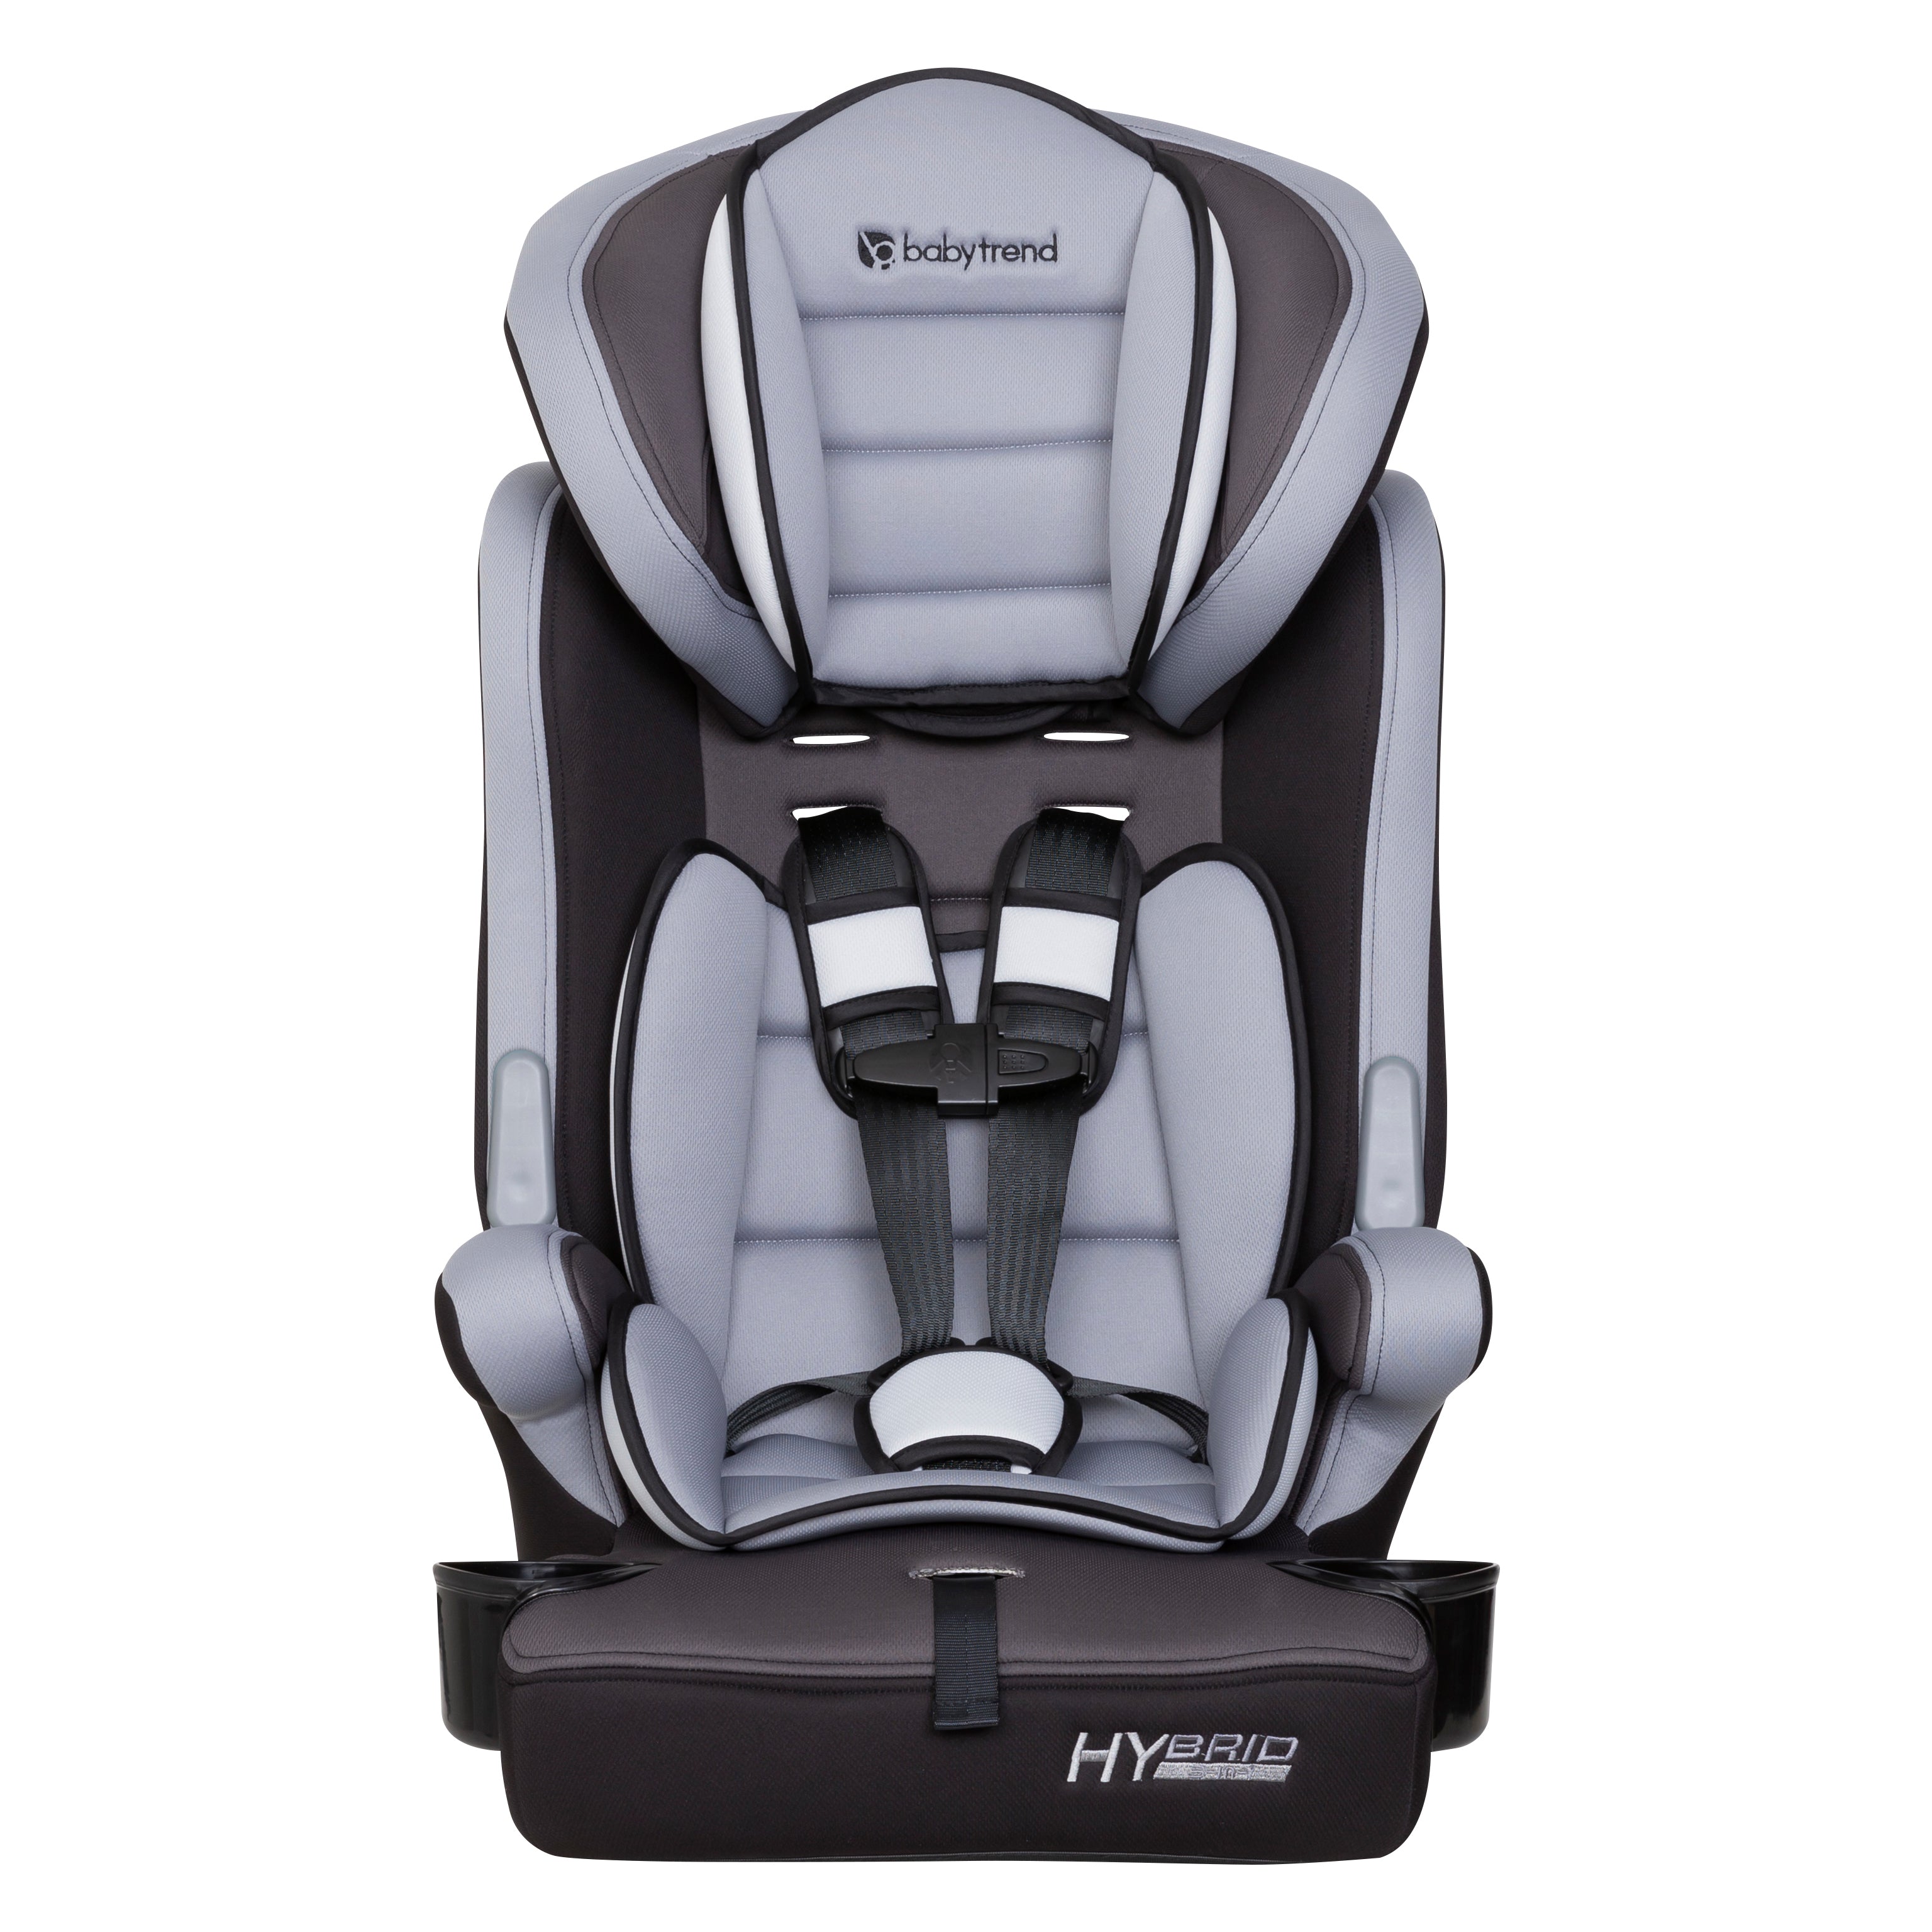 Baby Trend Hybrid Plus 3-in-1 Booster Car Seat, Teal Tide